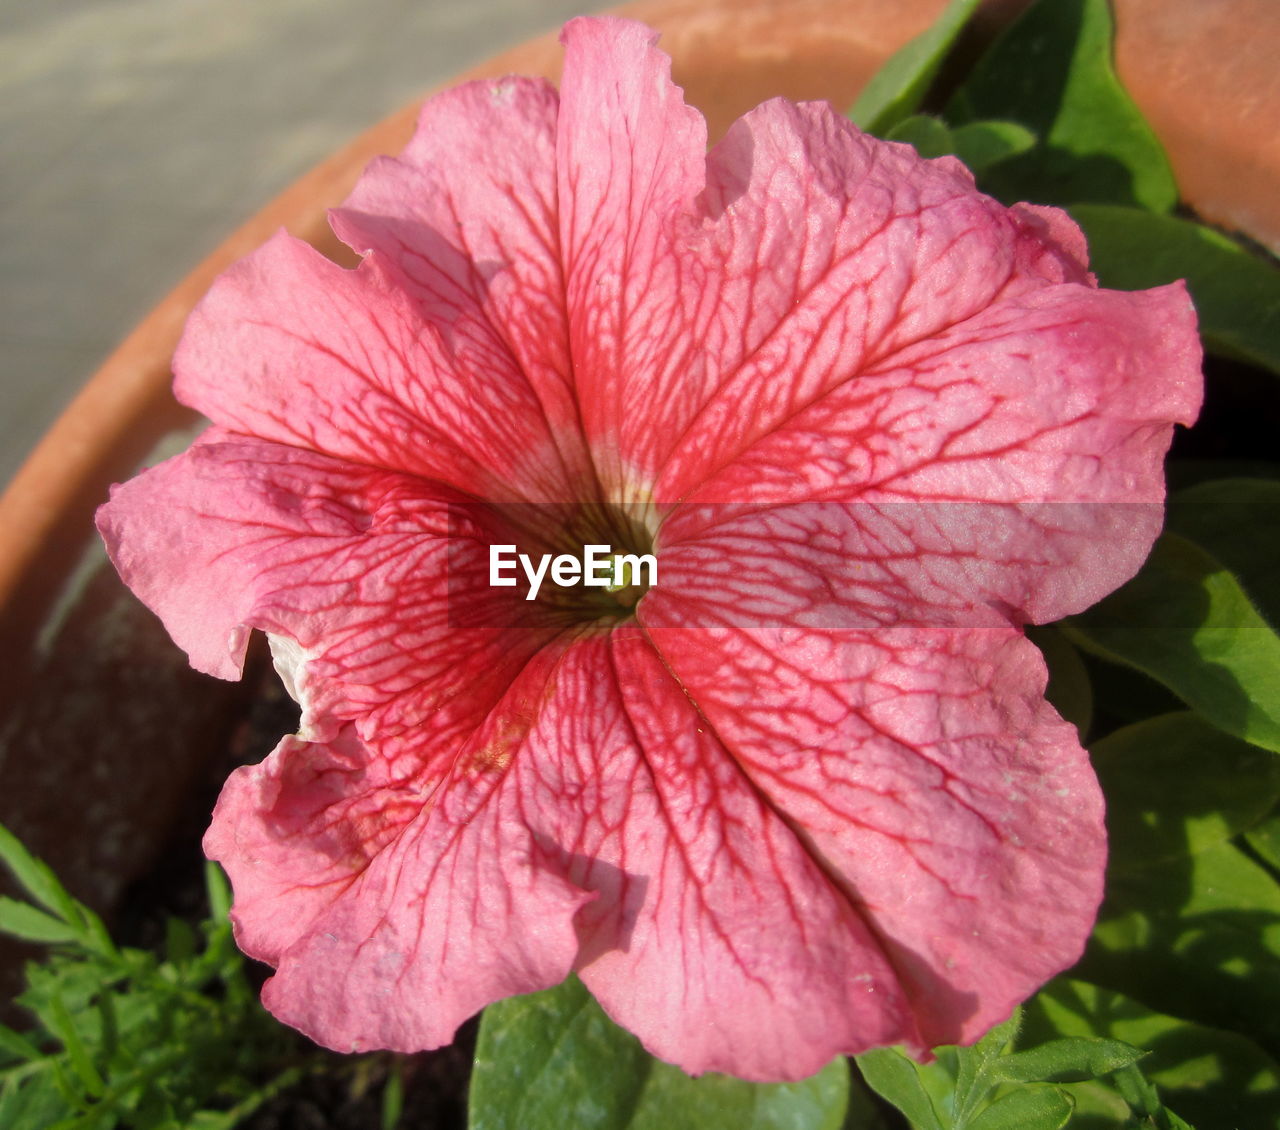 flower, flowering plant, plant, freshness, beauty in nature, petal, close-up, inflorescence, flower head, fragility, hibiscus, growth, nature, pink, pollen, leaf, plant part, no people, outdoors, botany, springtime, focus on foreground, stamen, day, blossom